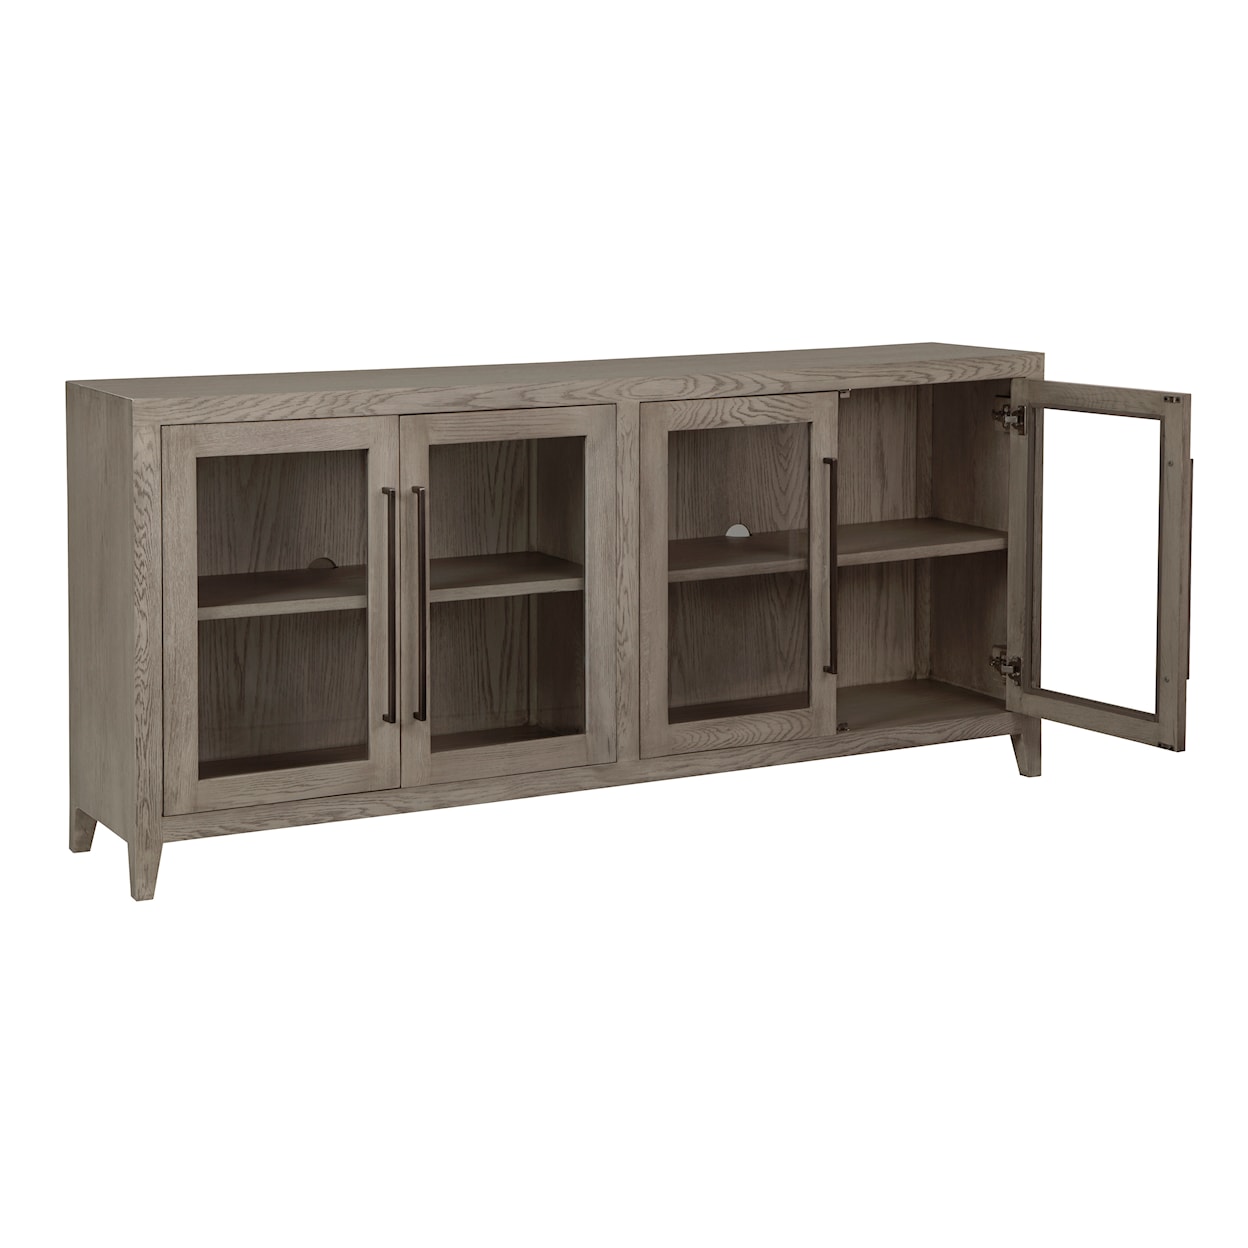 Signature Design by Ashley Dalenville A4000421 Accent Cabinet with ...